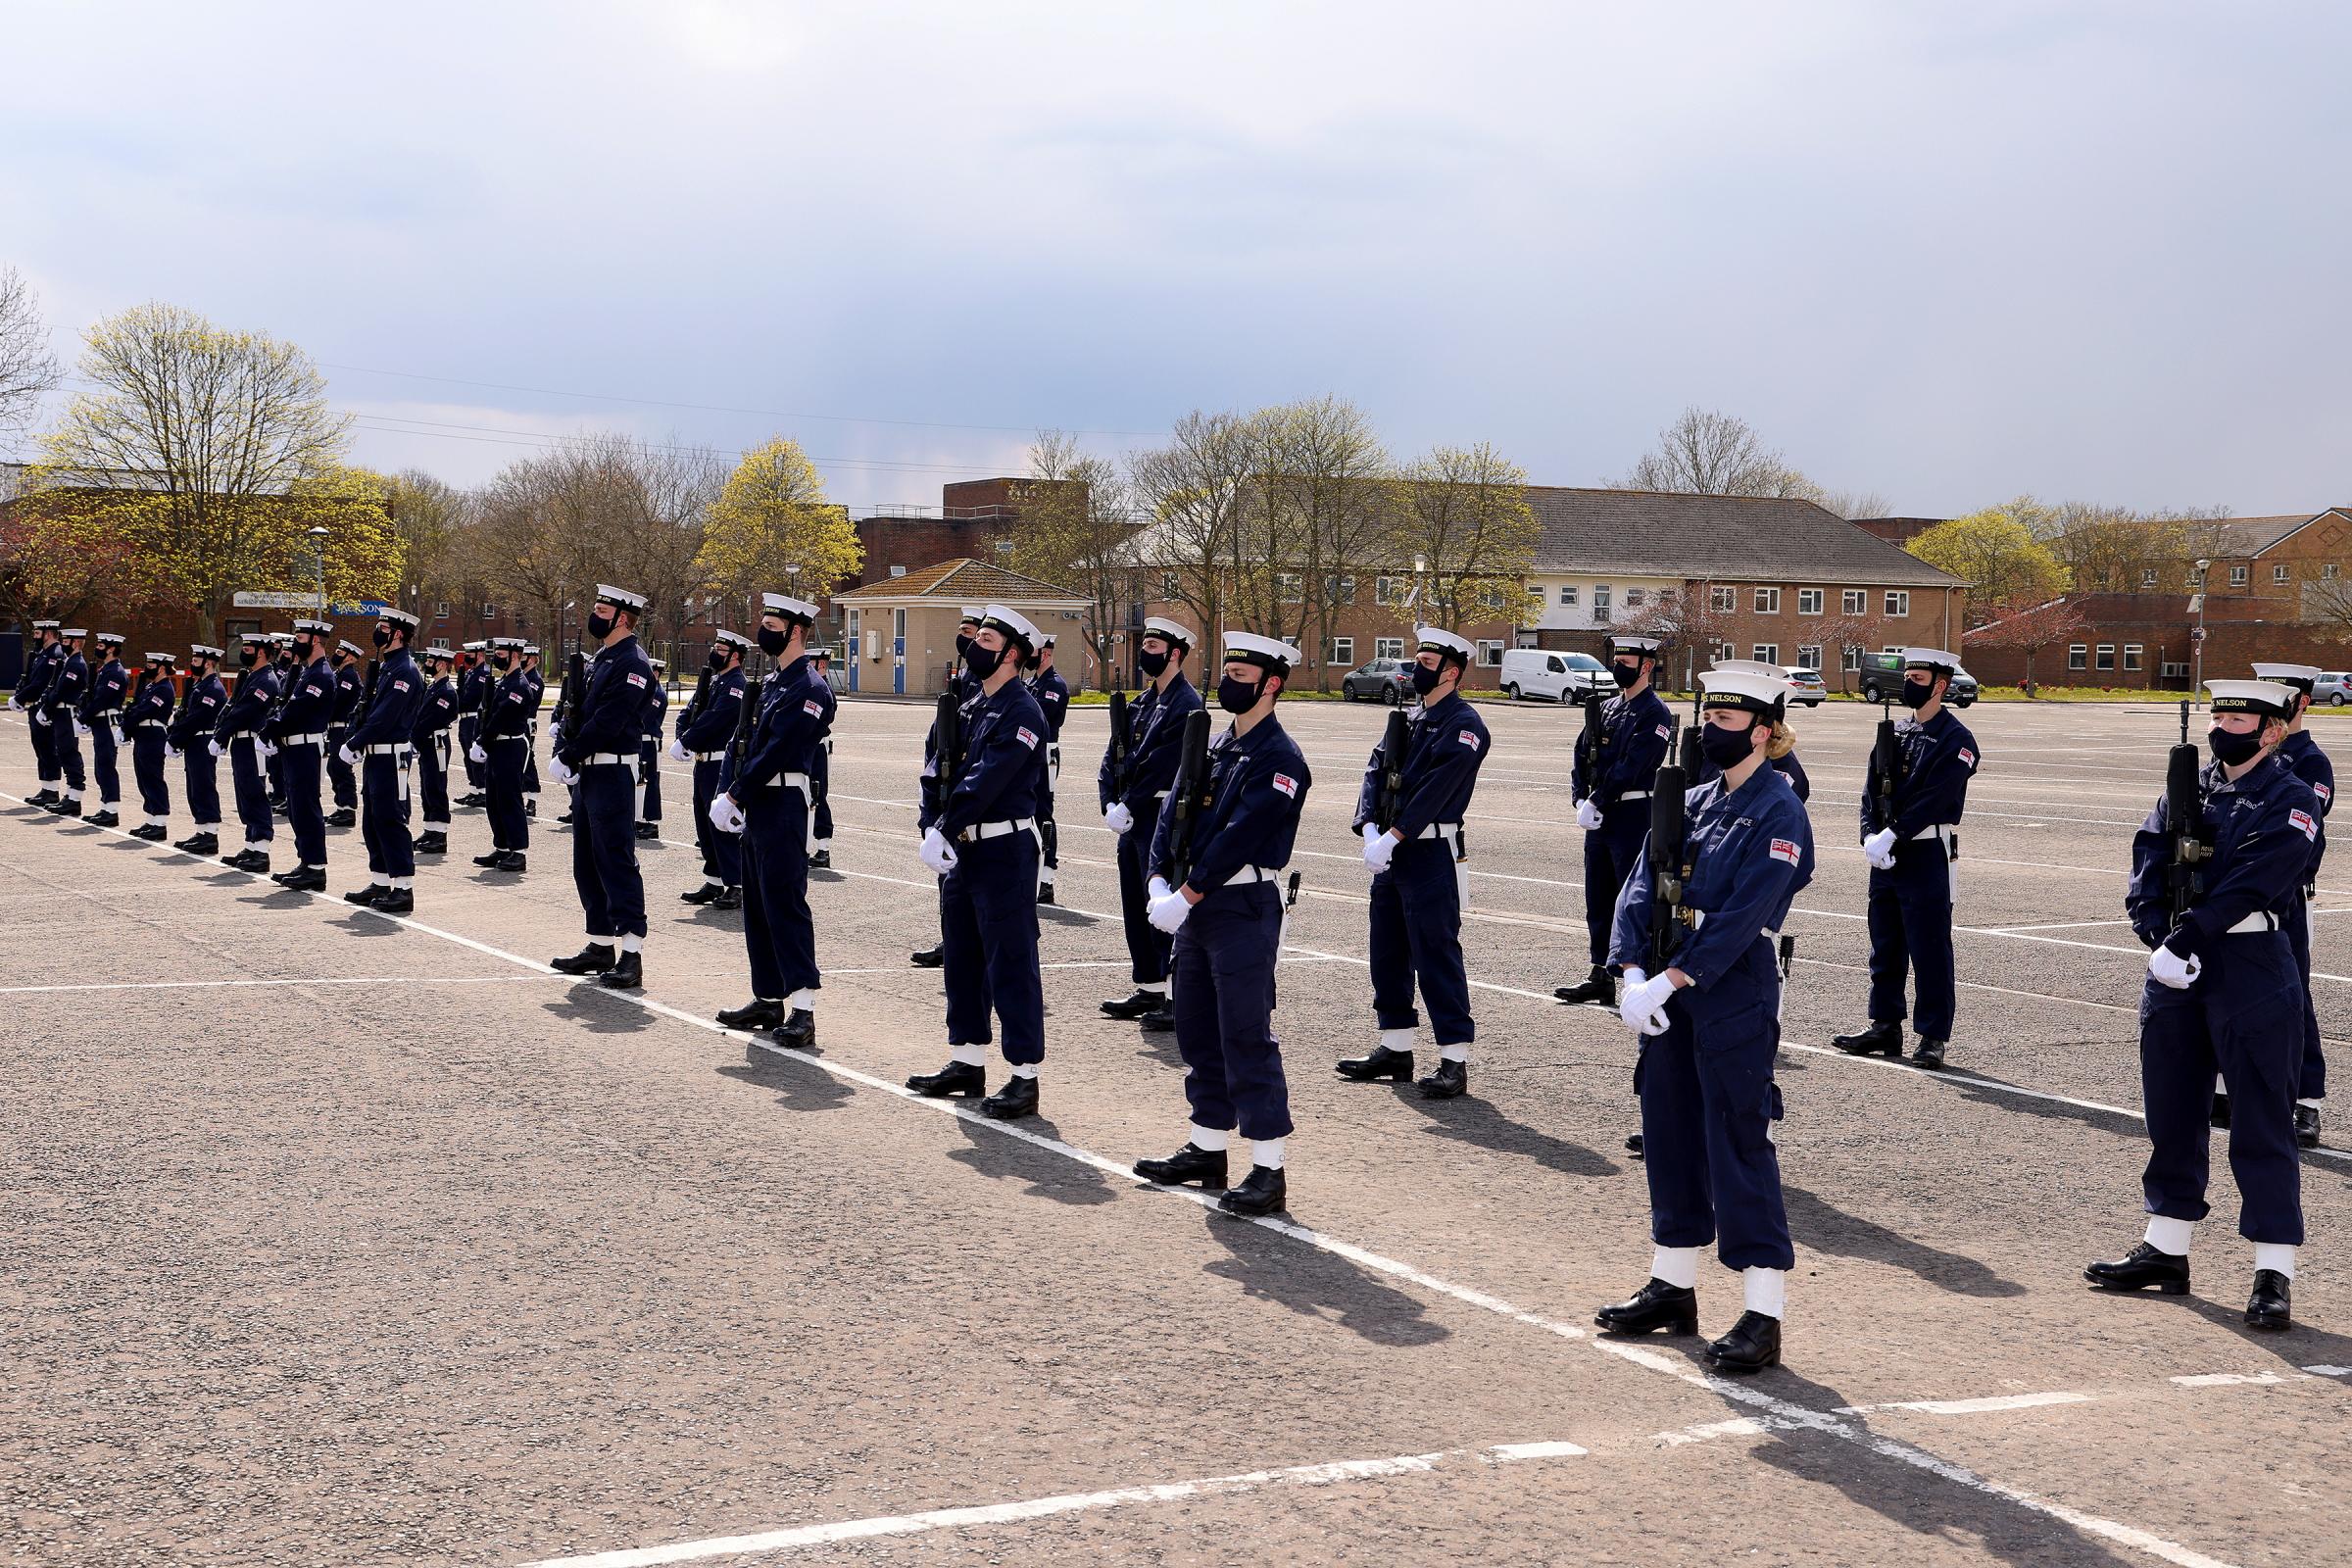 Sailors practise their drill at HMS Collingwood in Fareham. Picture: Royal Navy.